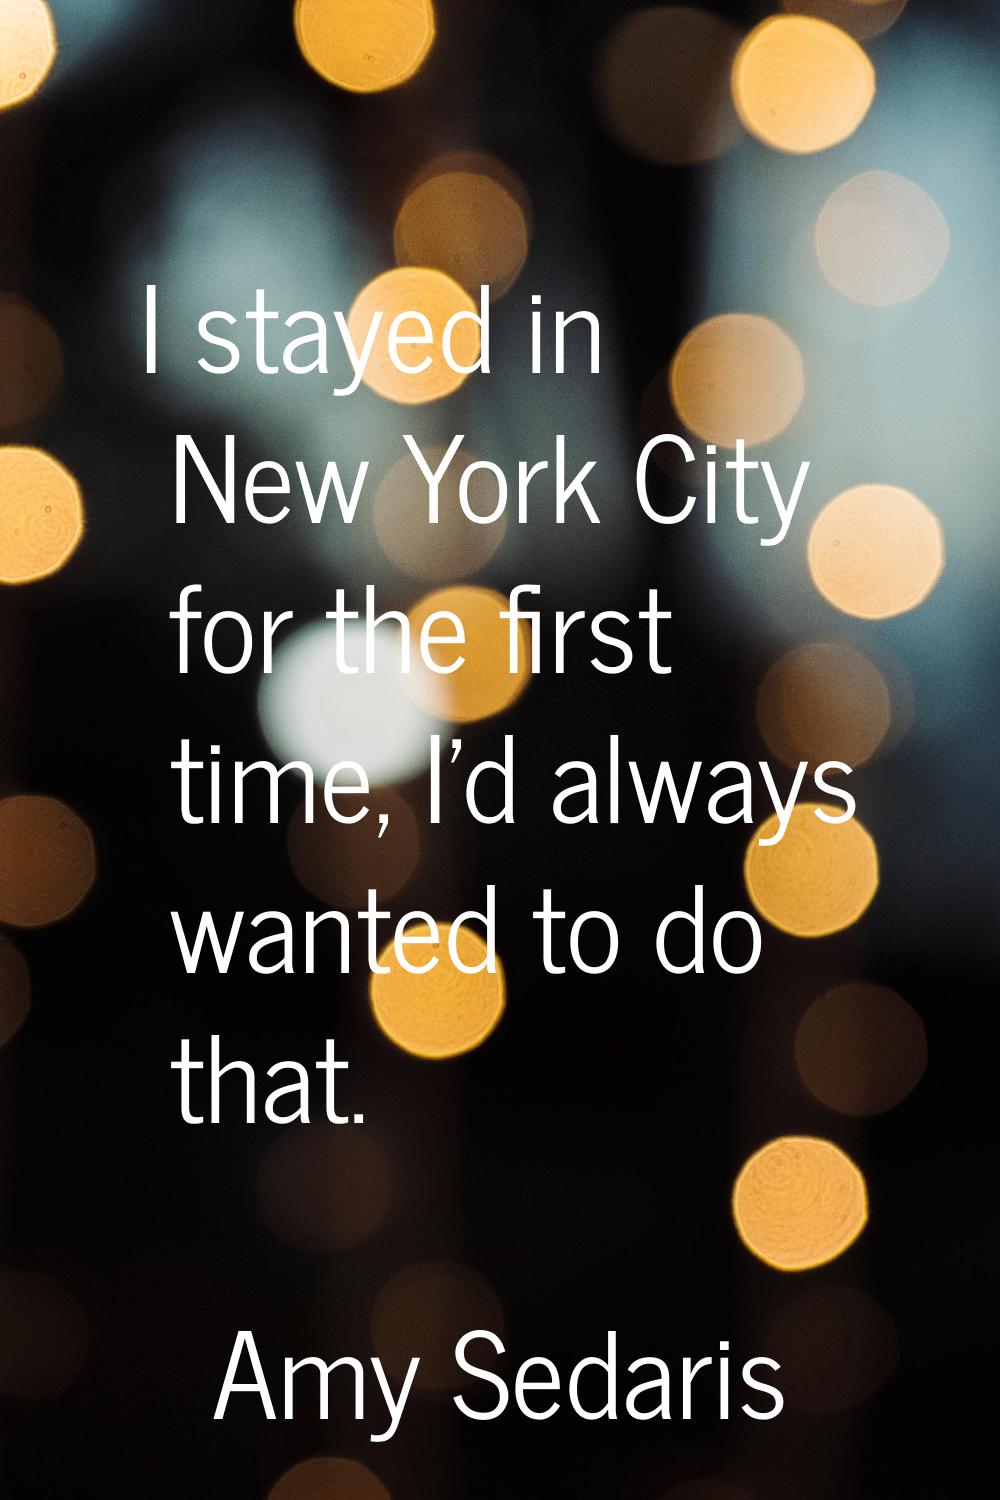 I stayed in New York City for the first time, I'd always wanted to do that.